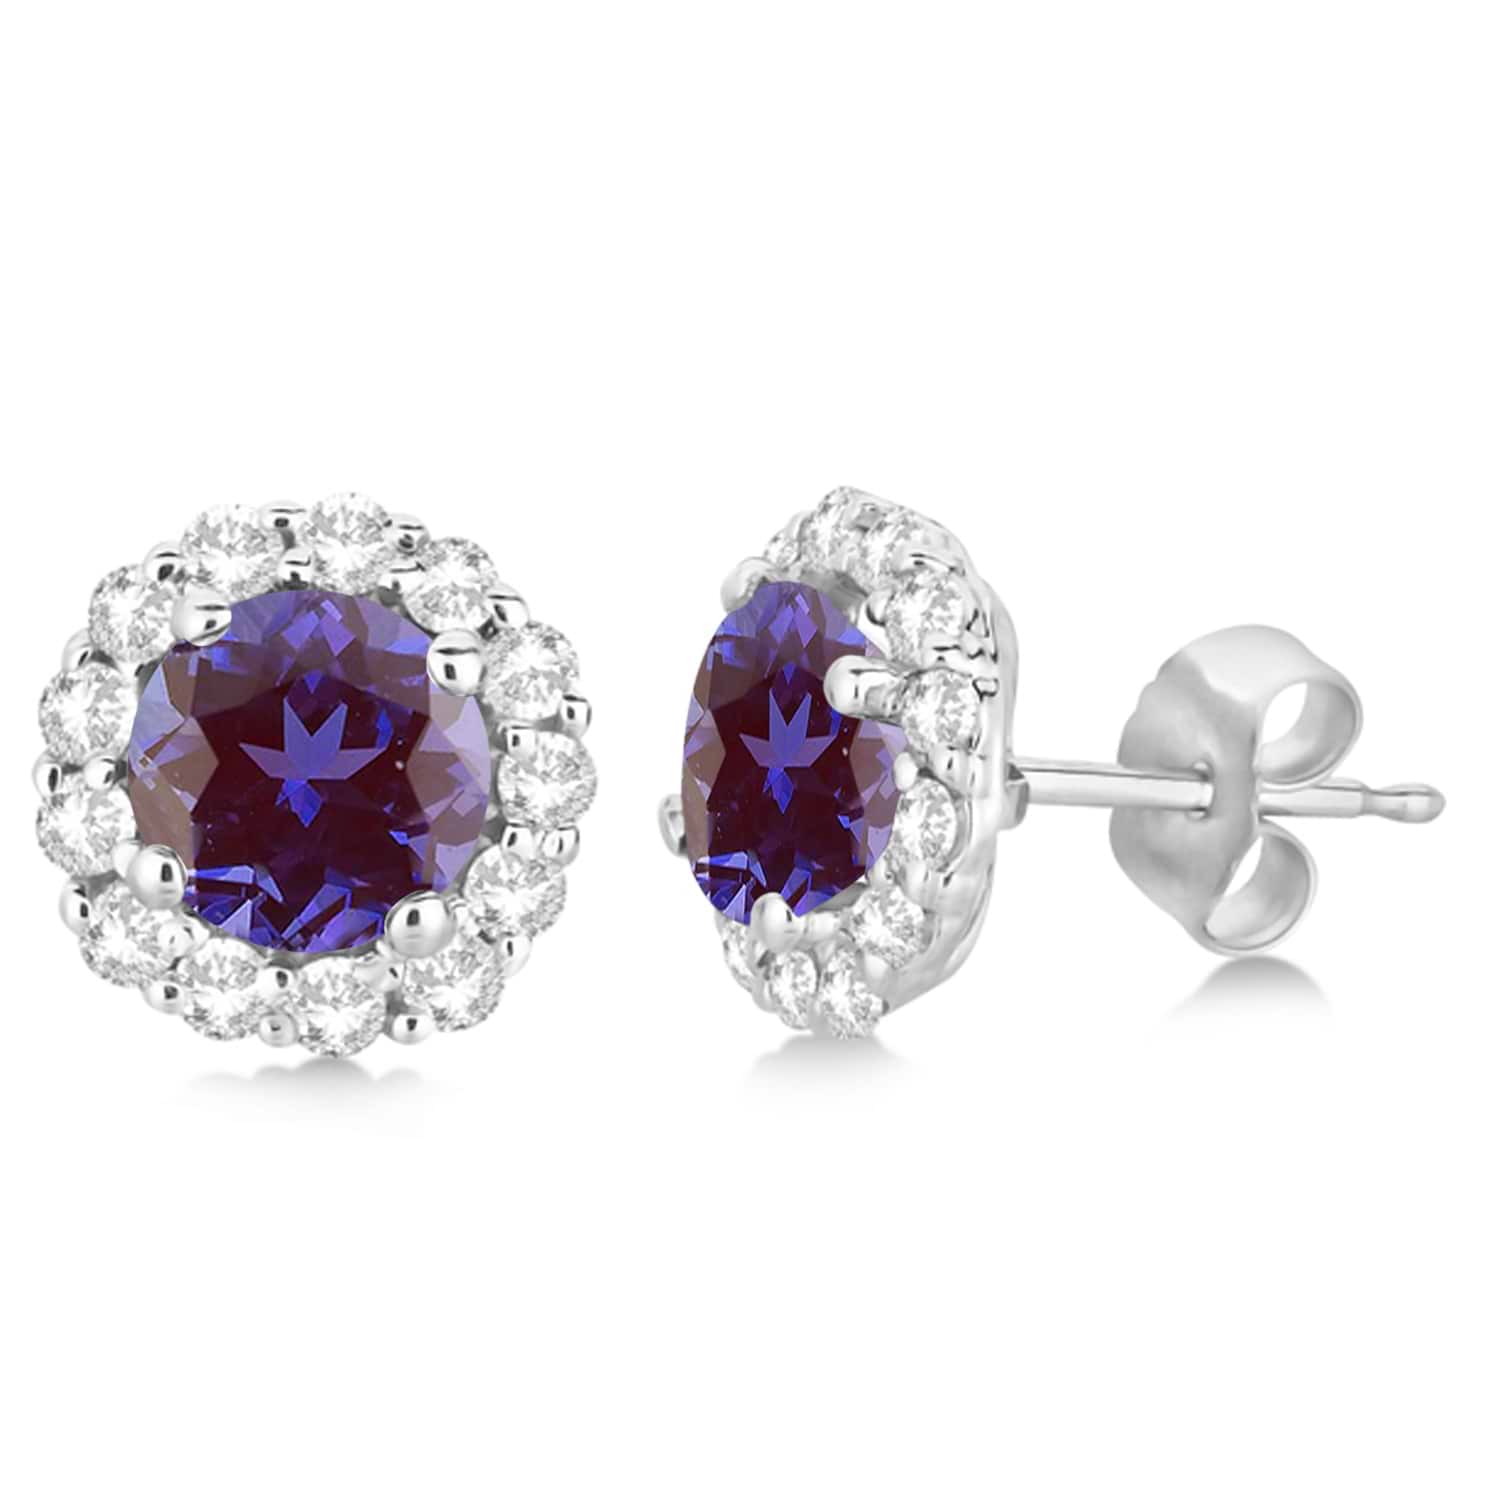 Halo Diamond Accented and Lab Alexandrite Earrings 14K White Gold (2.95ct)